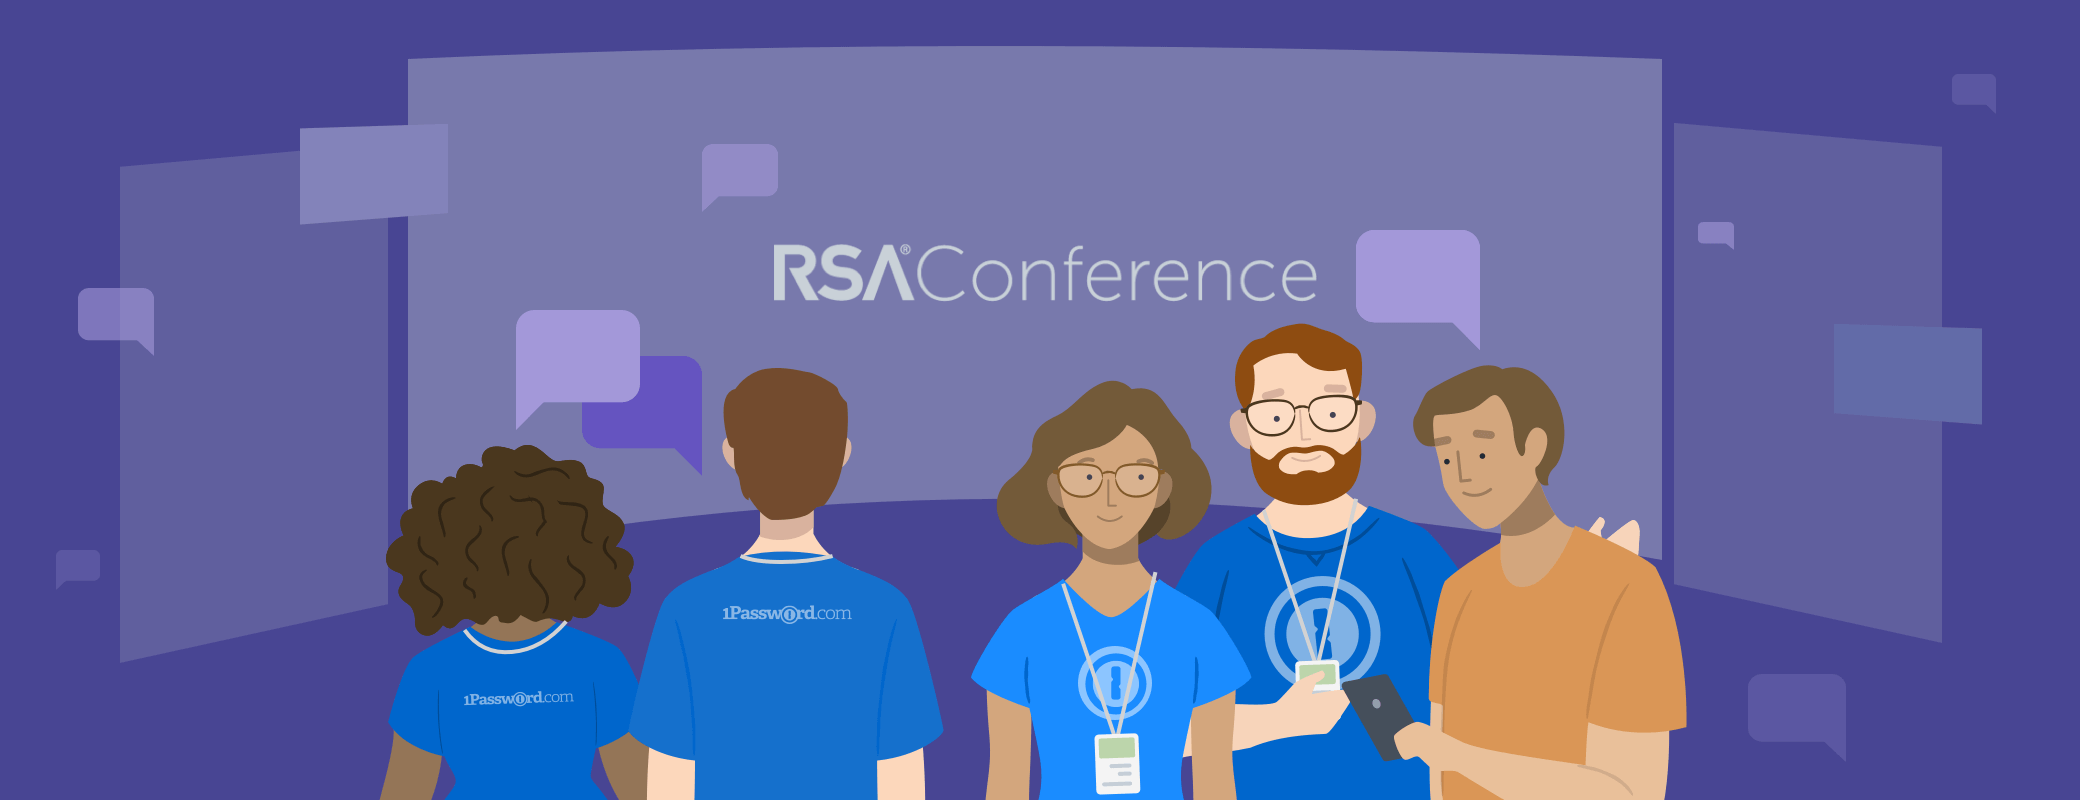 Come find us at RSA Conference 2019